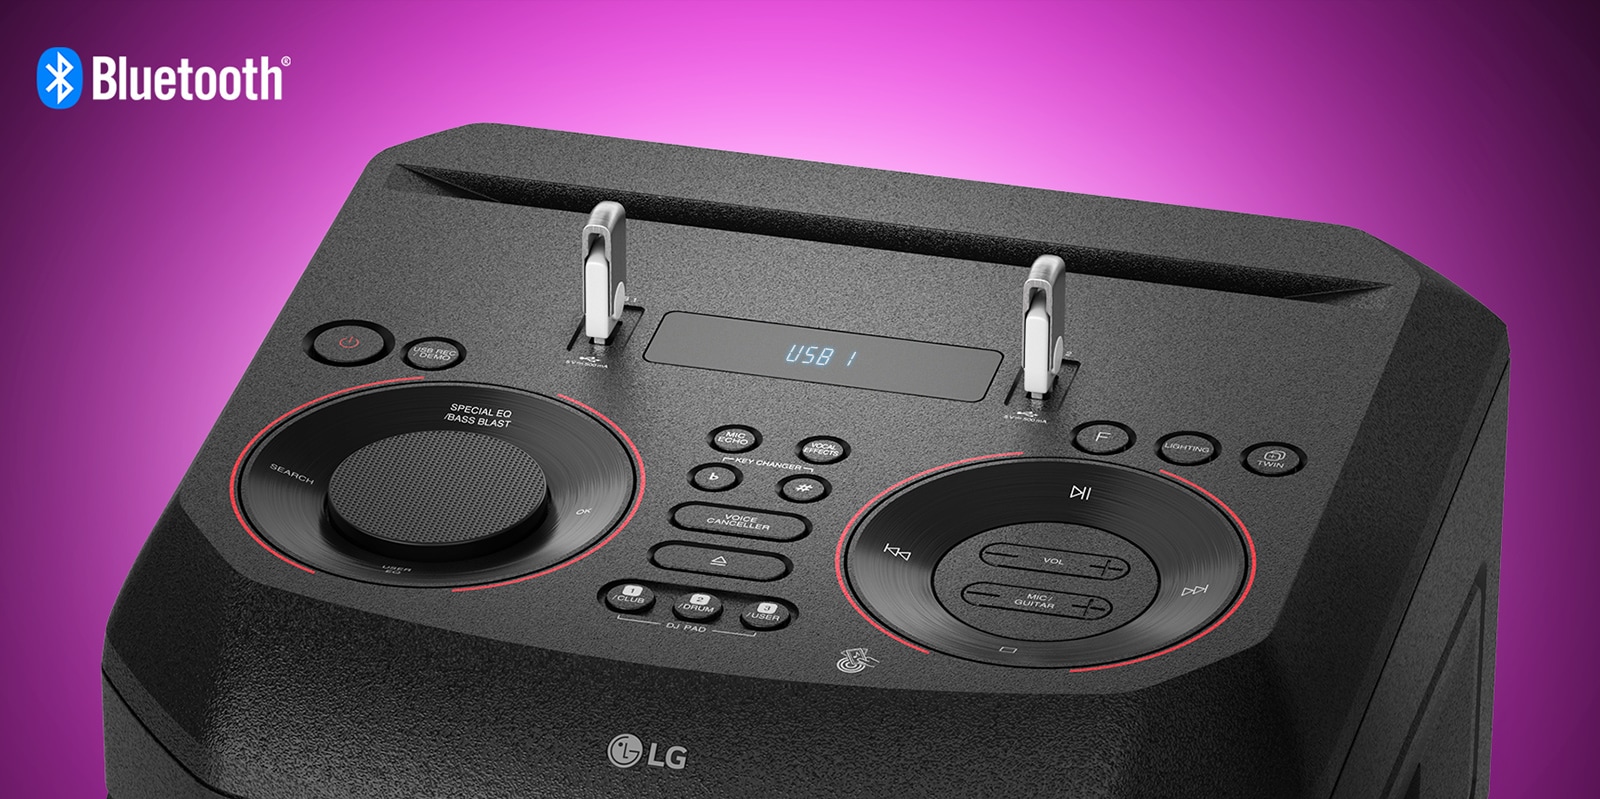 A closeup view of controls on top of LG XBOOM, with two USBs plugged in. A Bluetooth logo is shown in the upper left corner.